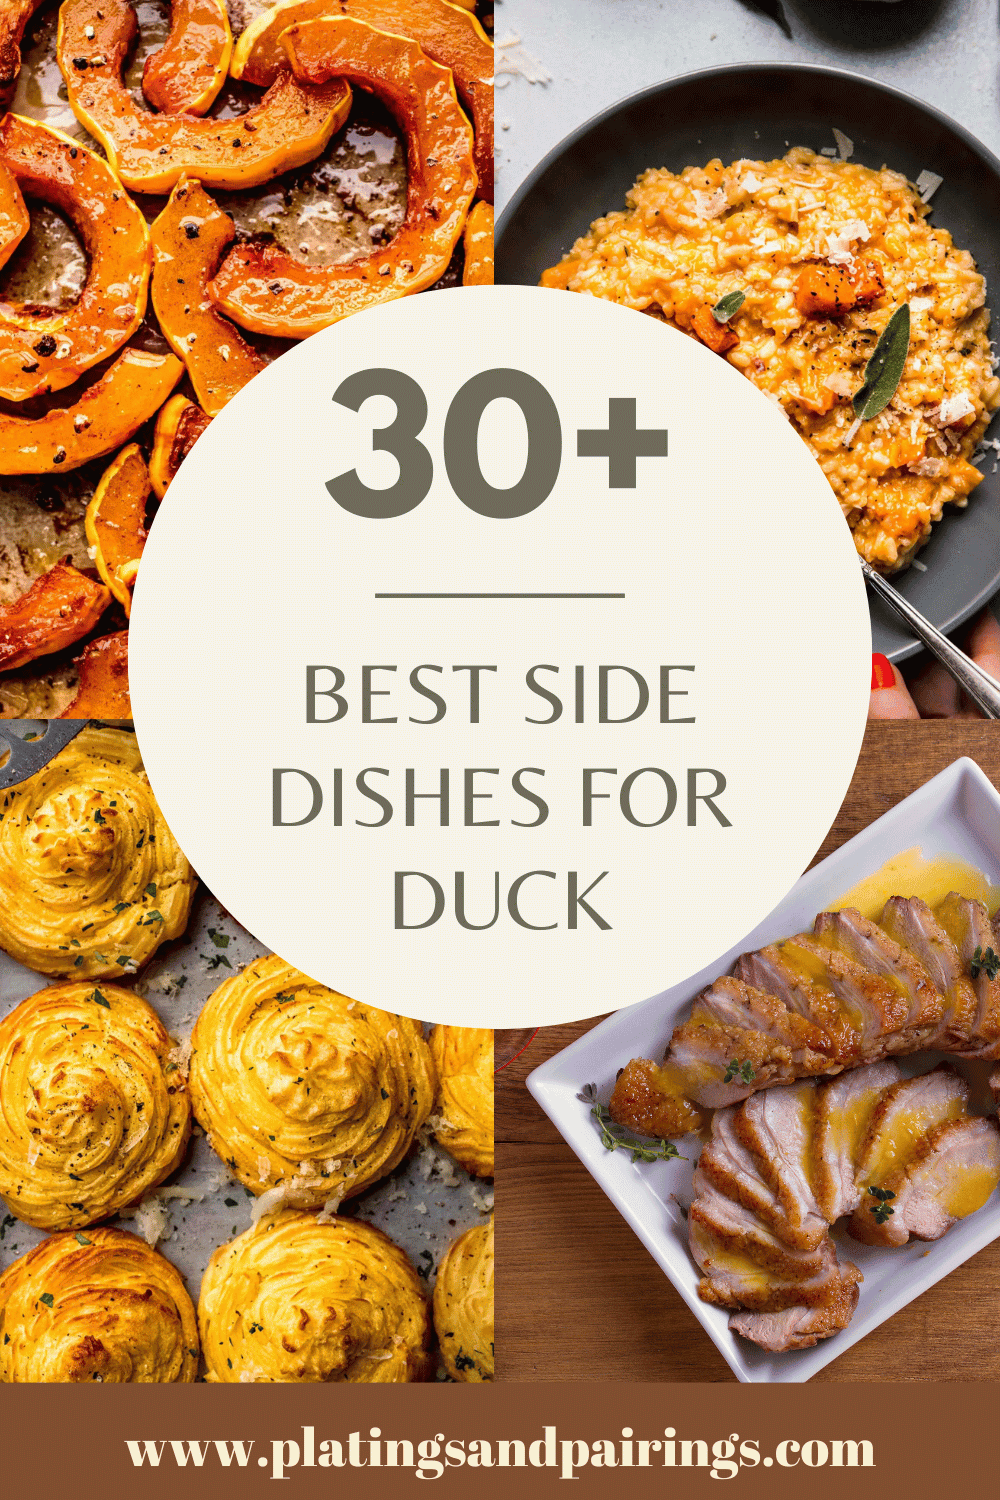 Collage of side dishes for duck with text overlay.